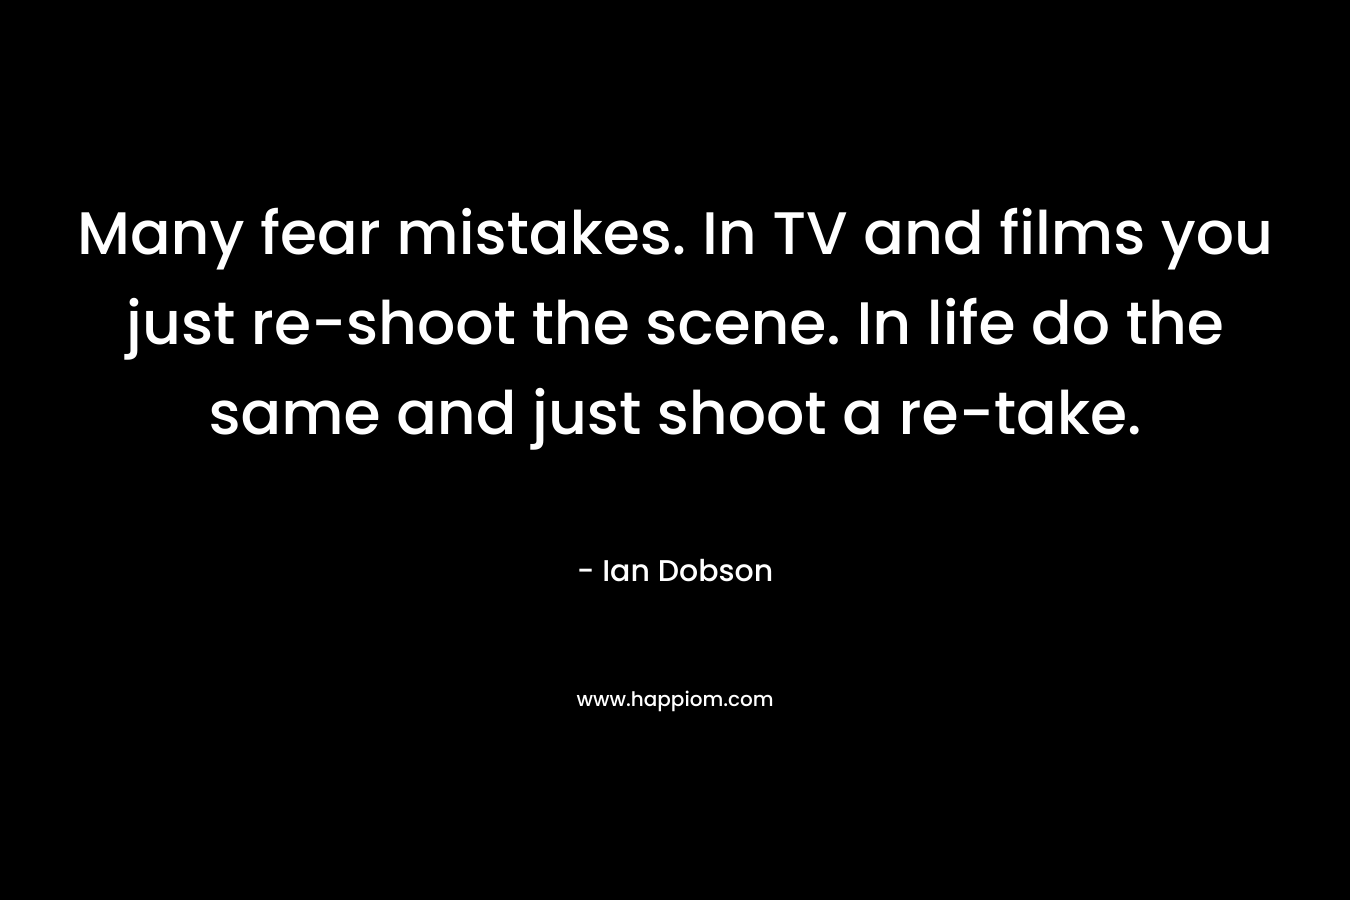 Many fear mistakes. In TV and films you just re-shoot the scene. In life do the same and just shoot a re-take.